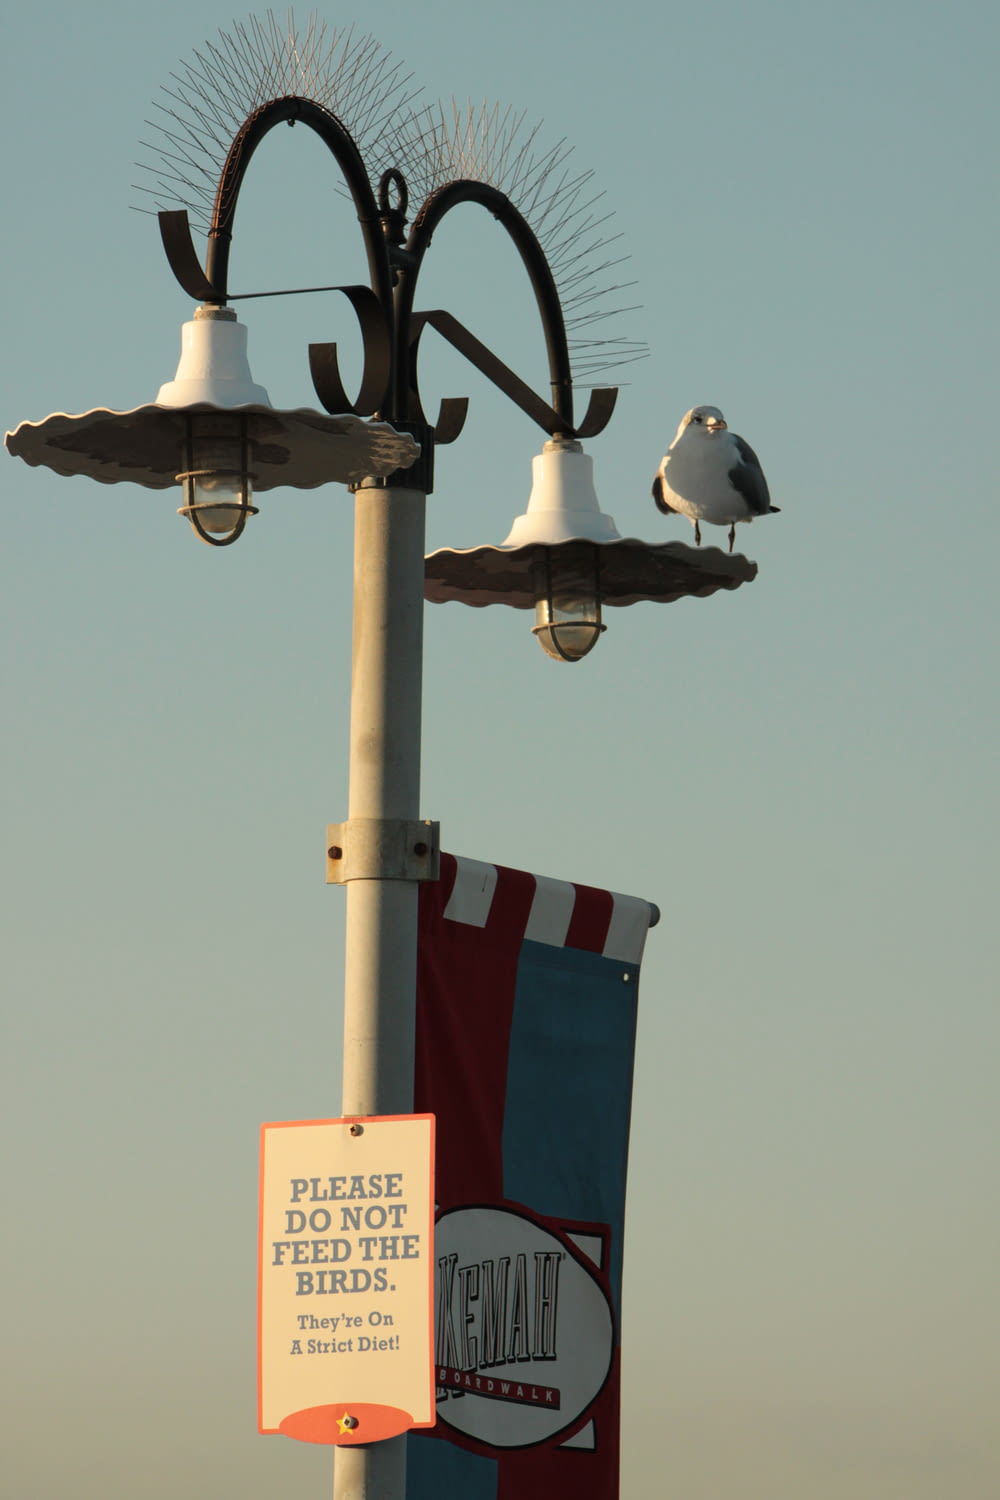 2 birds perched on gray metal post under blue sky during daytime